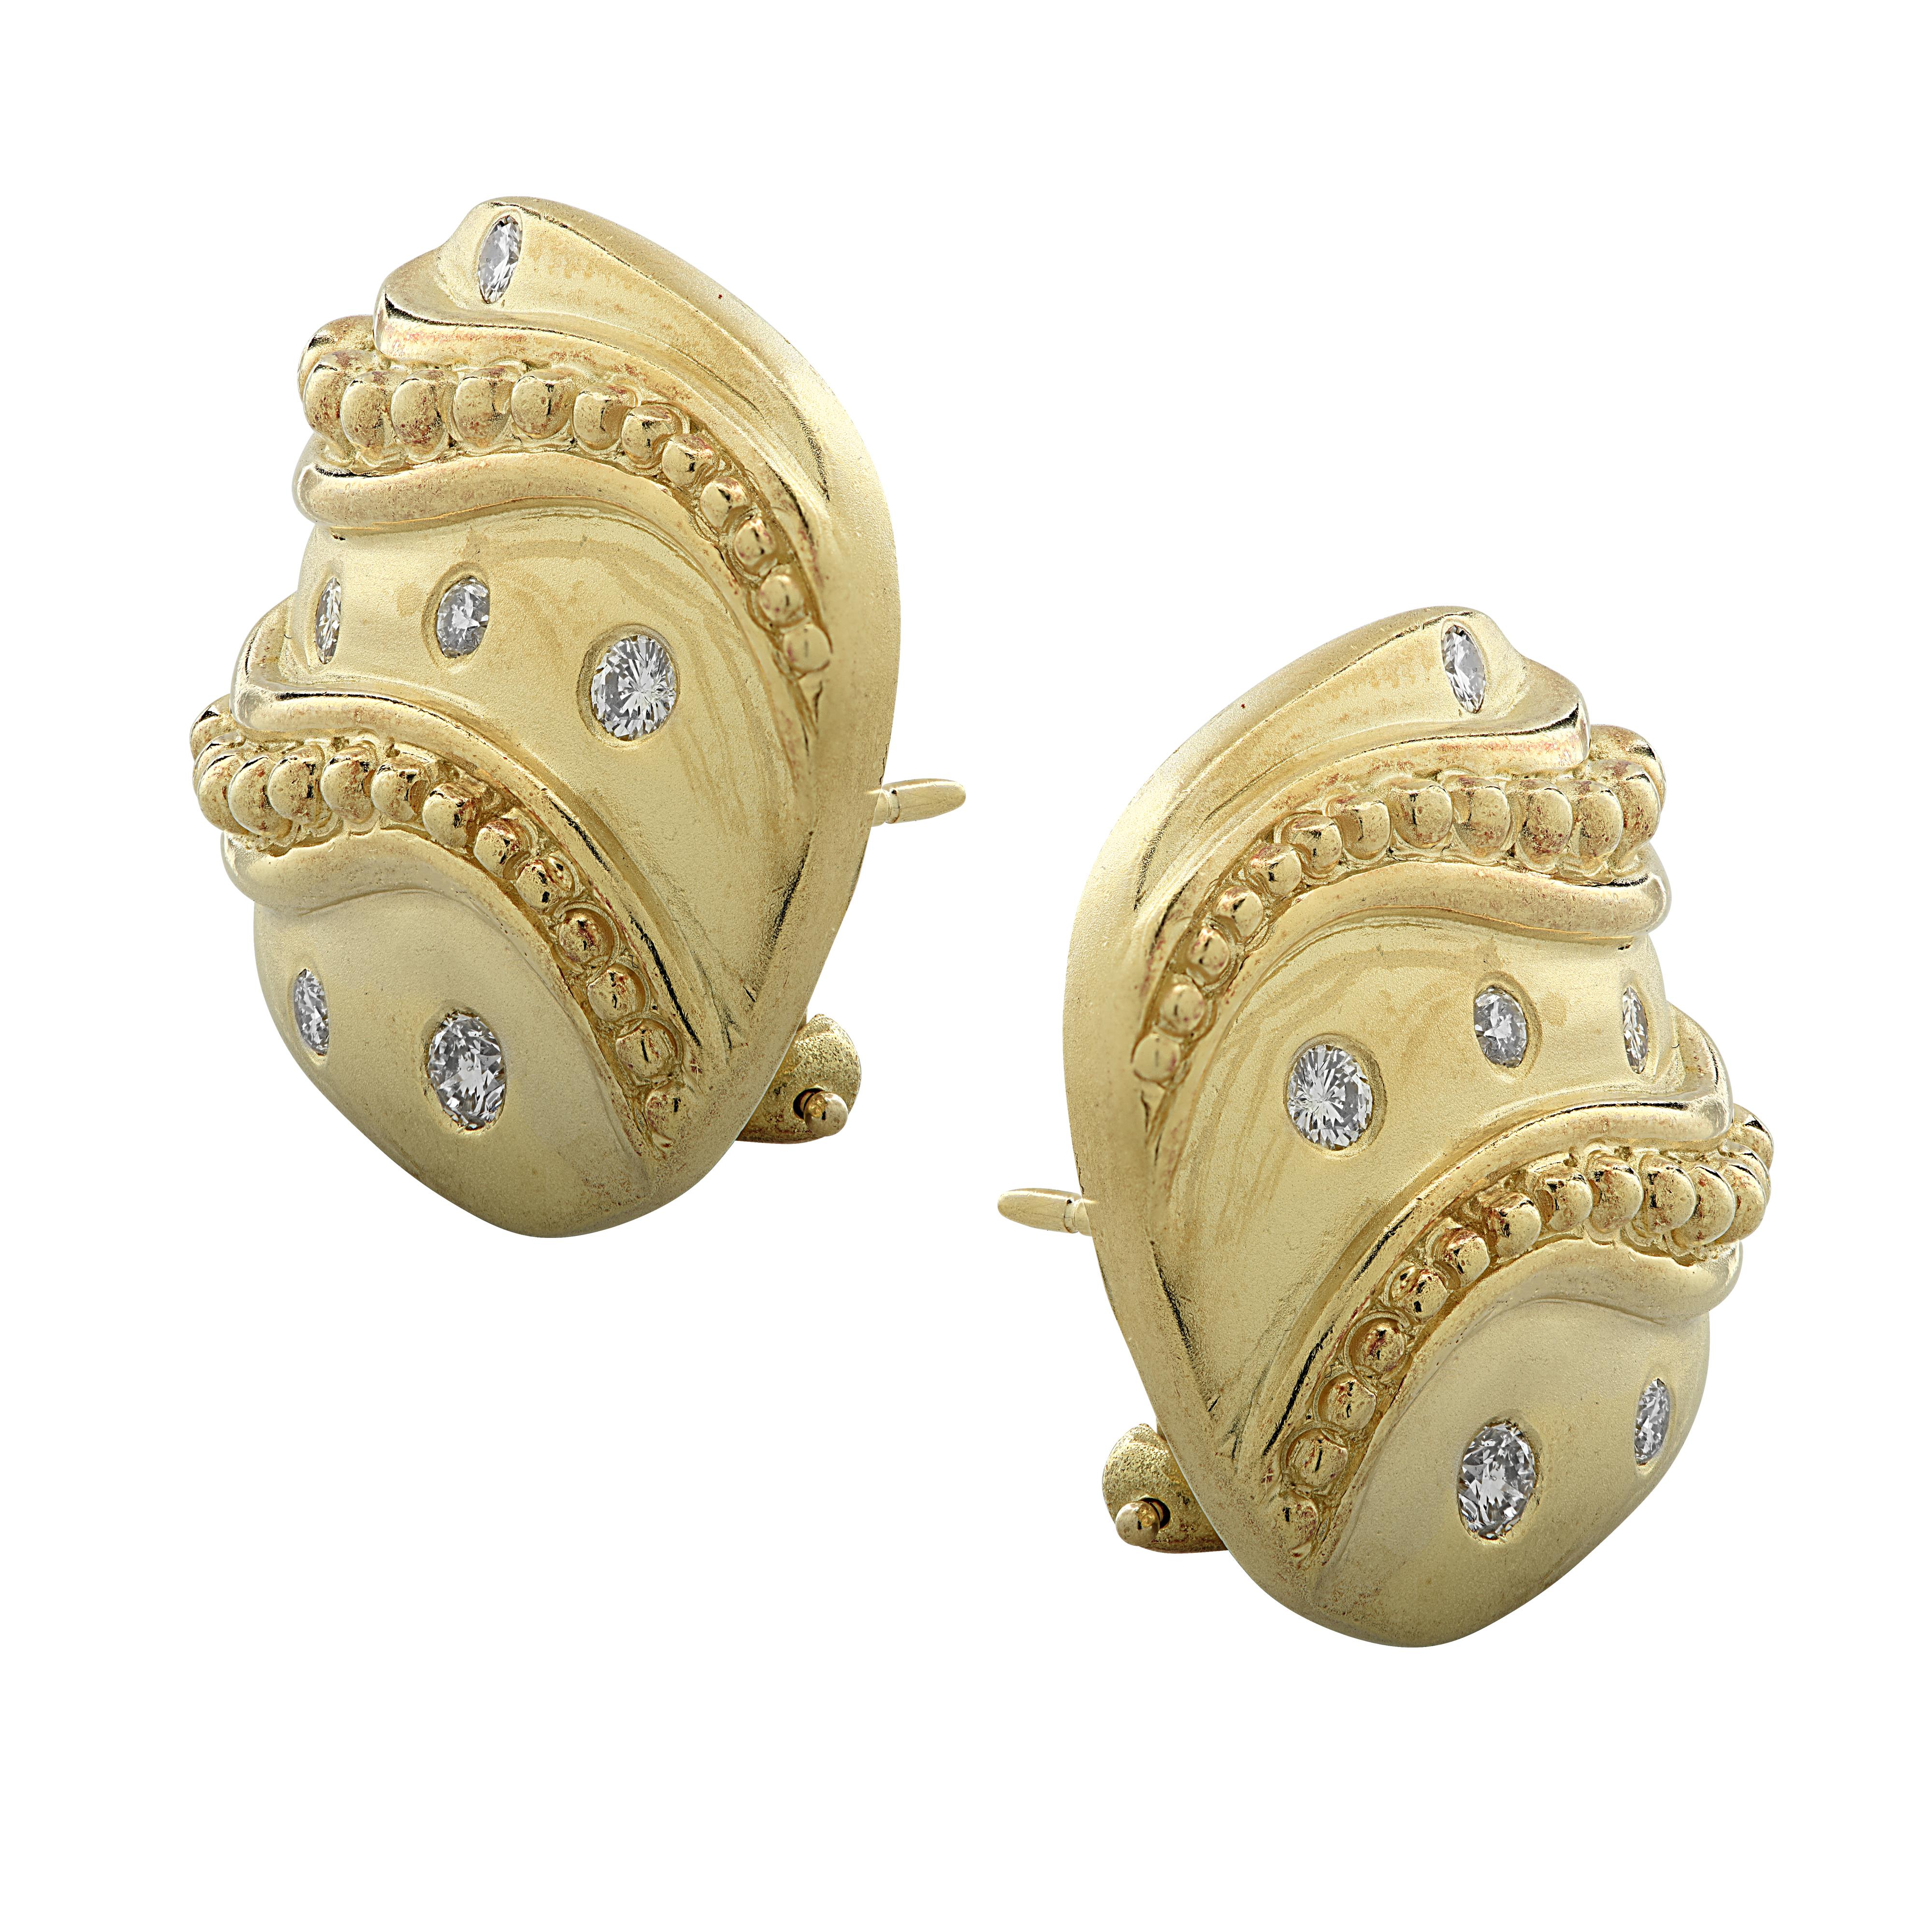 Beautiful stud earrings crafted in 18 karat yellow gold, featuring 12 round brilliant cut diamonds weighing approximately .50 carats total, G color, VS clarity. These whimsical earrings are fashioned into square shapes detailed with gold beads set